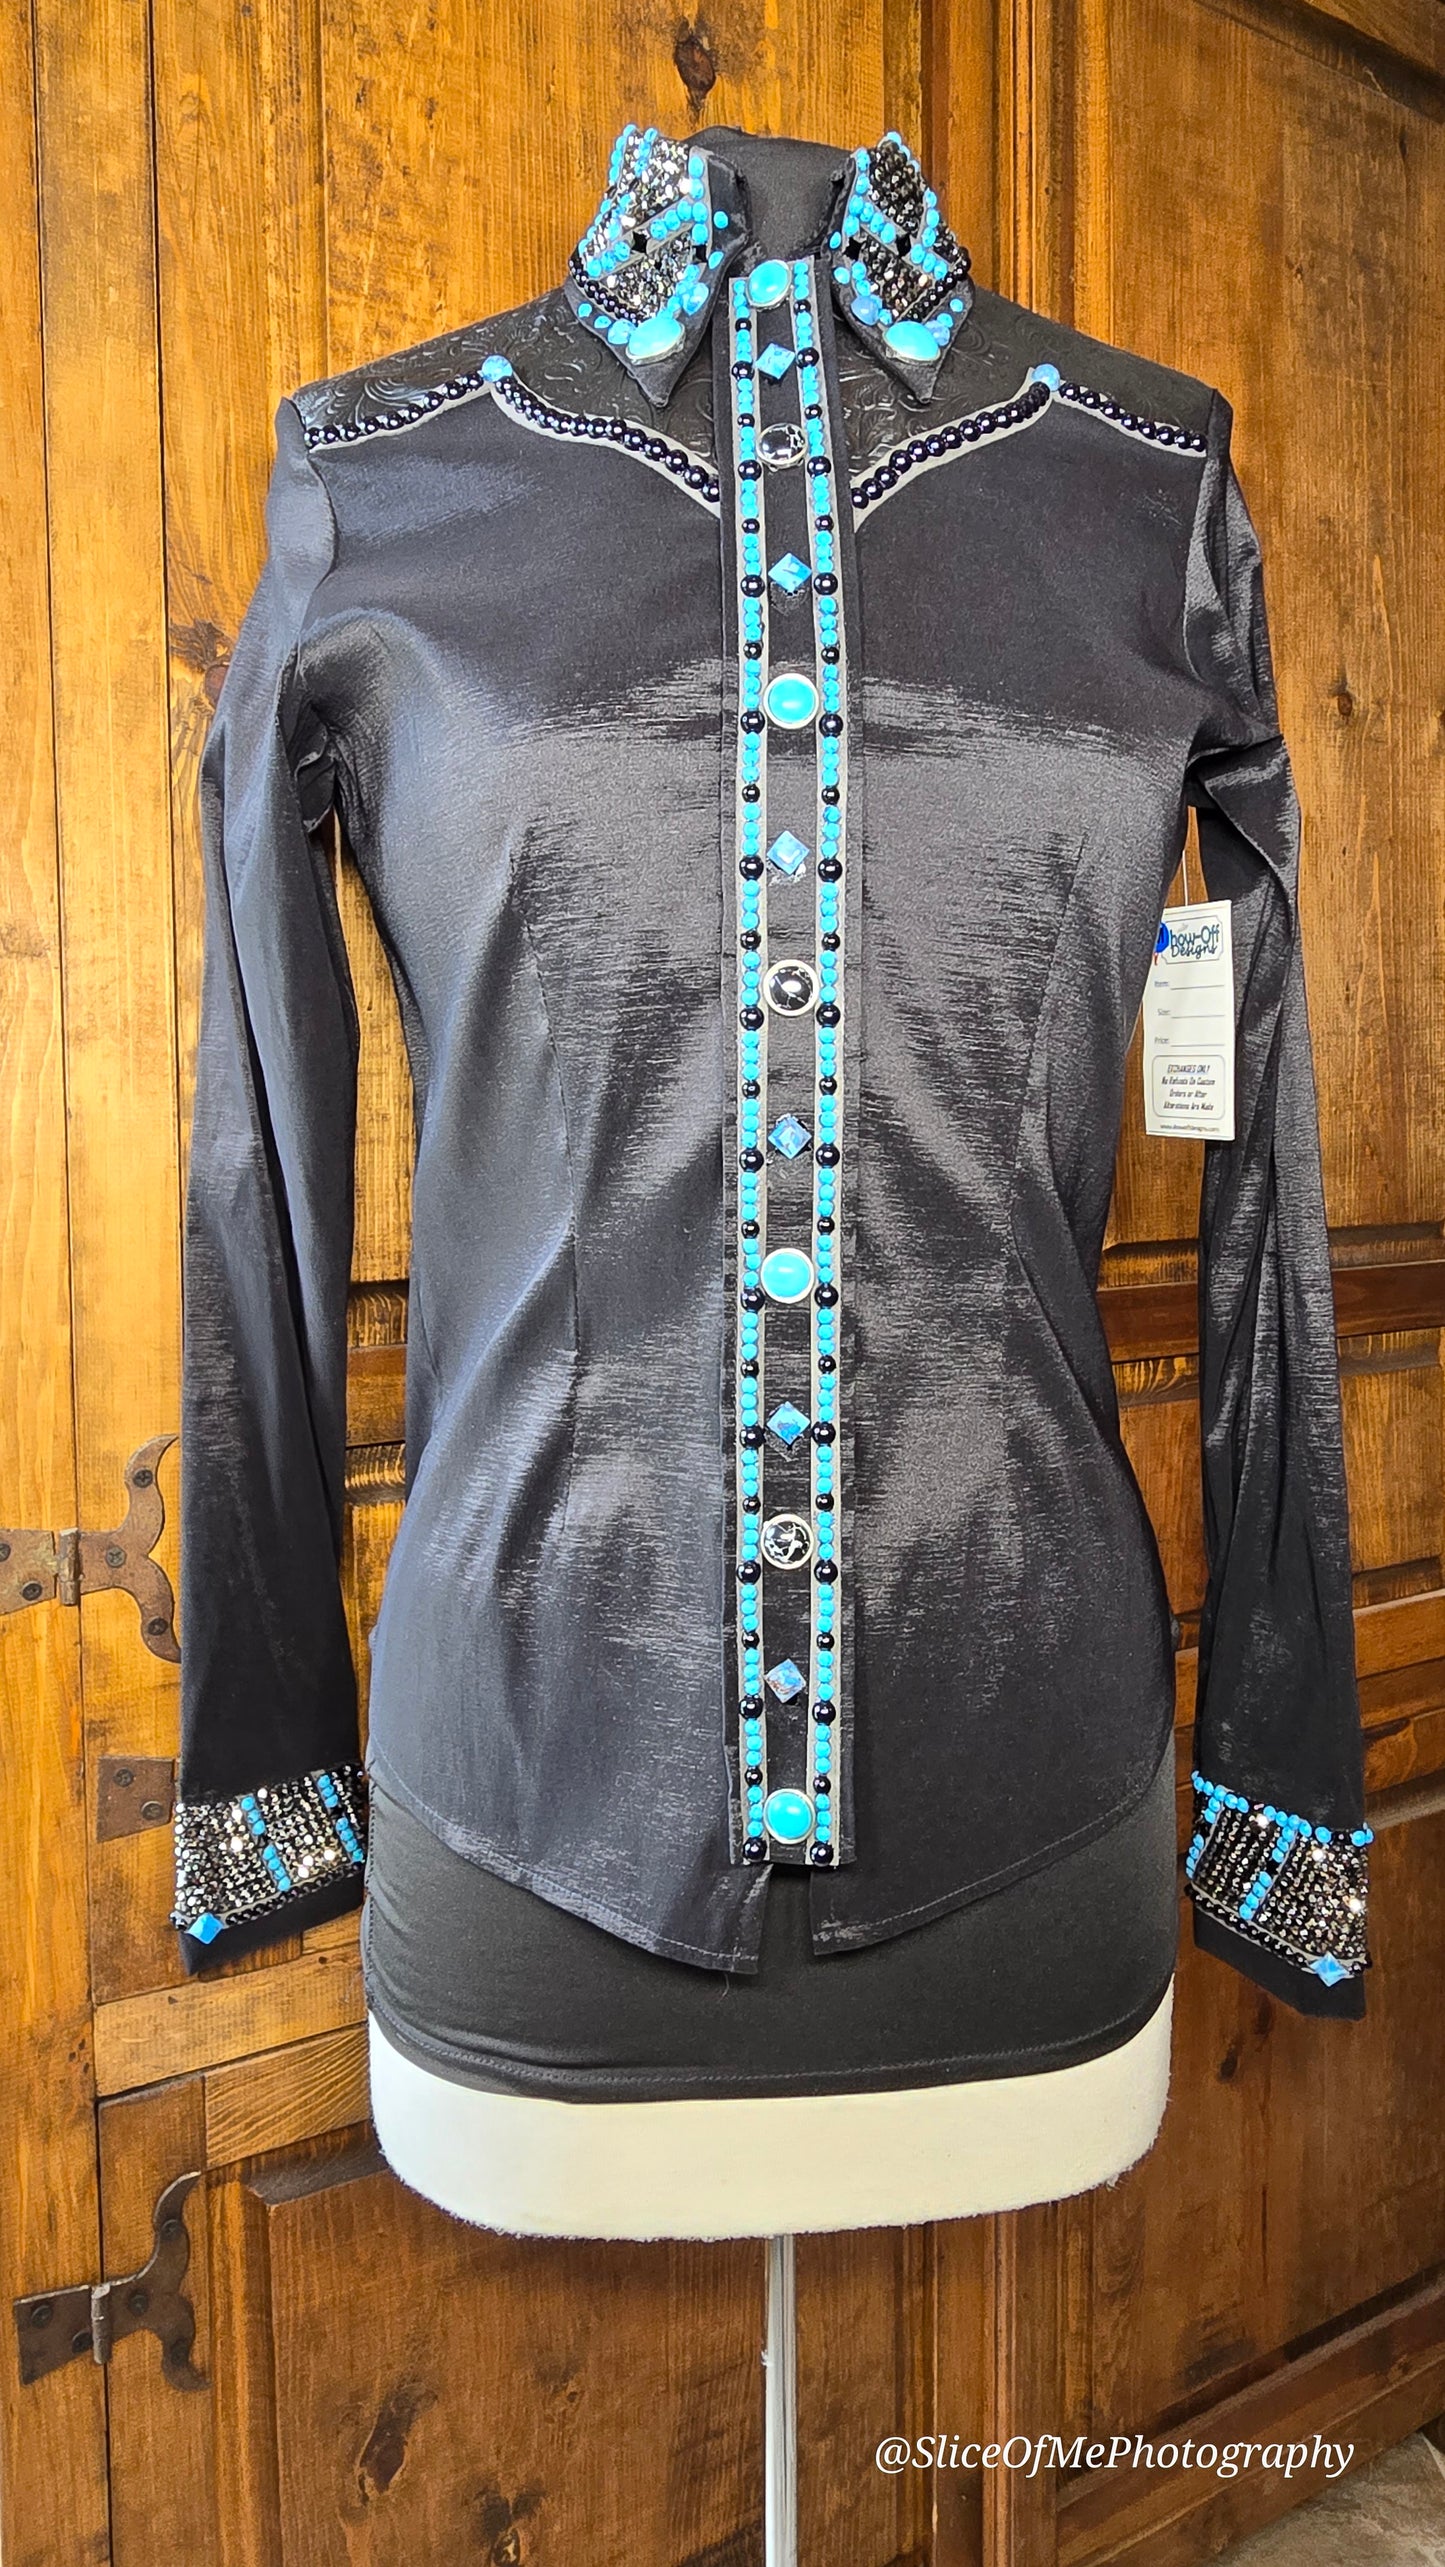 Medium Stretch Taffeta Black Day Shirt with turquois, matte metallic silver and leather texture